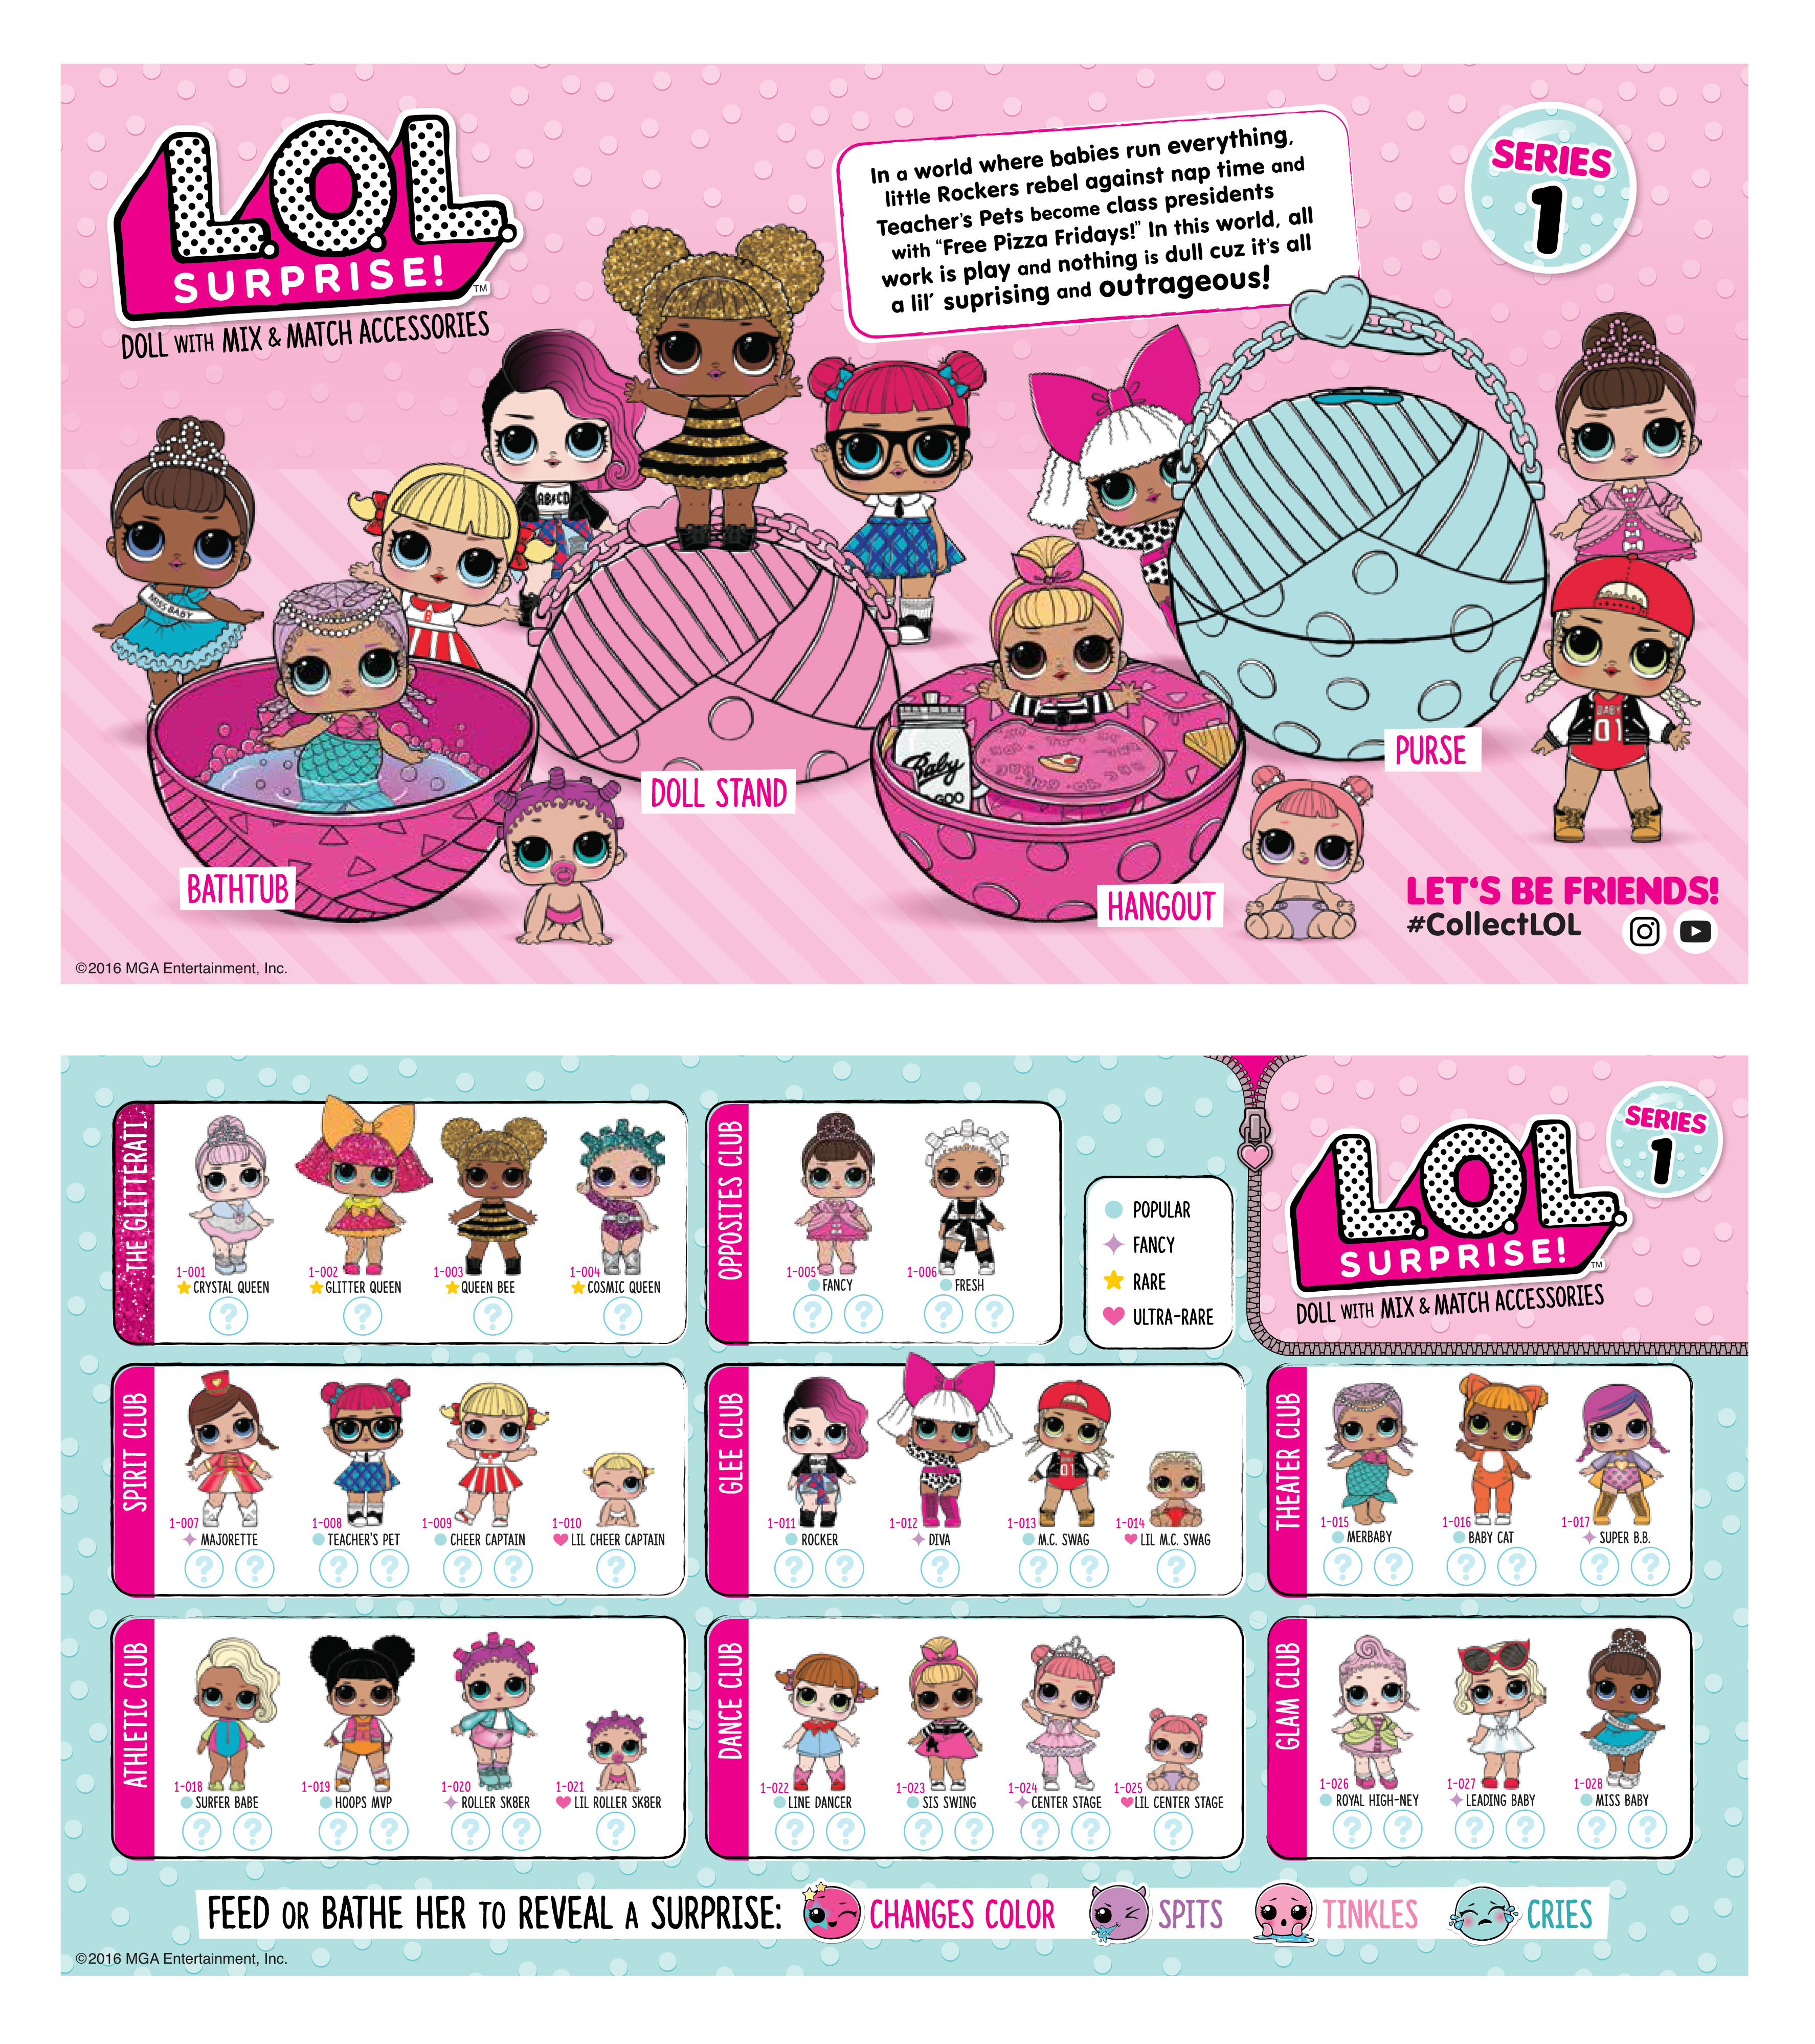 Download Fun Activities And Color Ins To Print Out And Play With L O L Surprise Prima Toys,How To Make Tempura Batter For Onion Rings